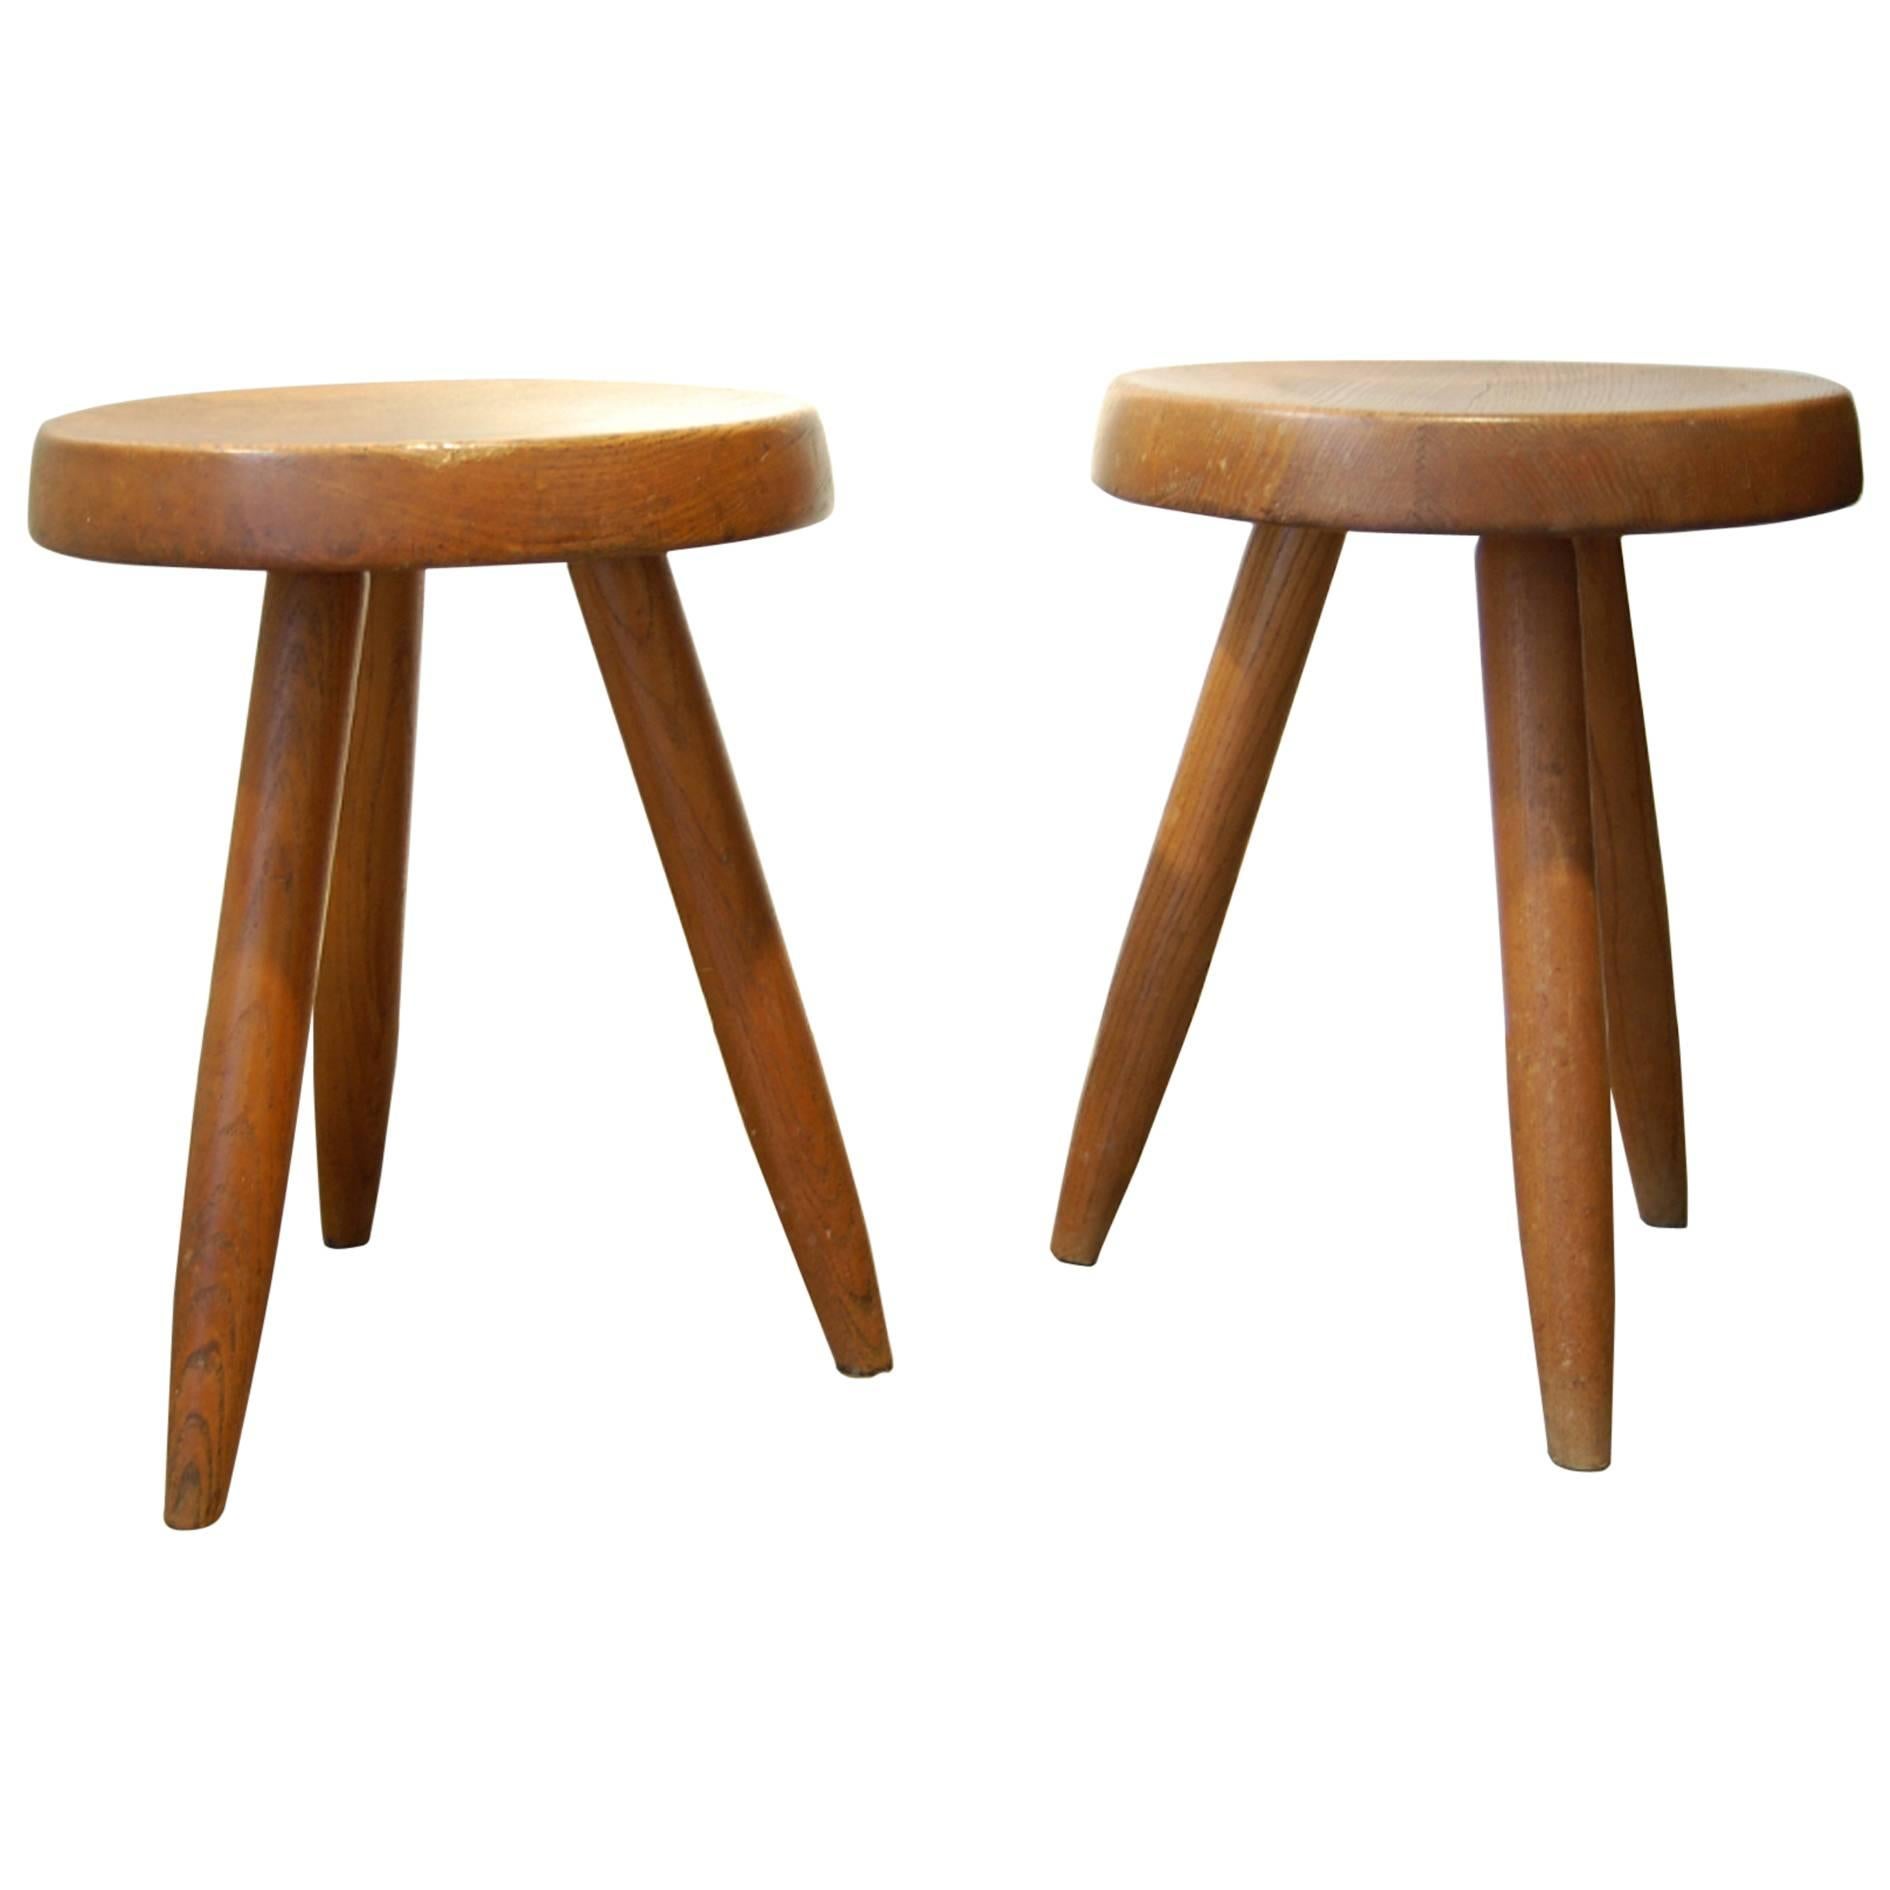 Charlotte Perriand, Pair of Wooden Stools